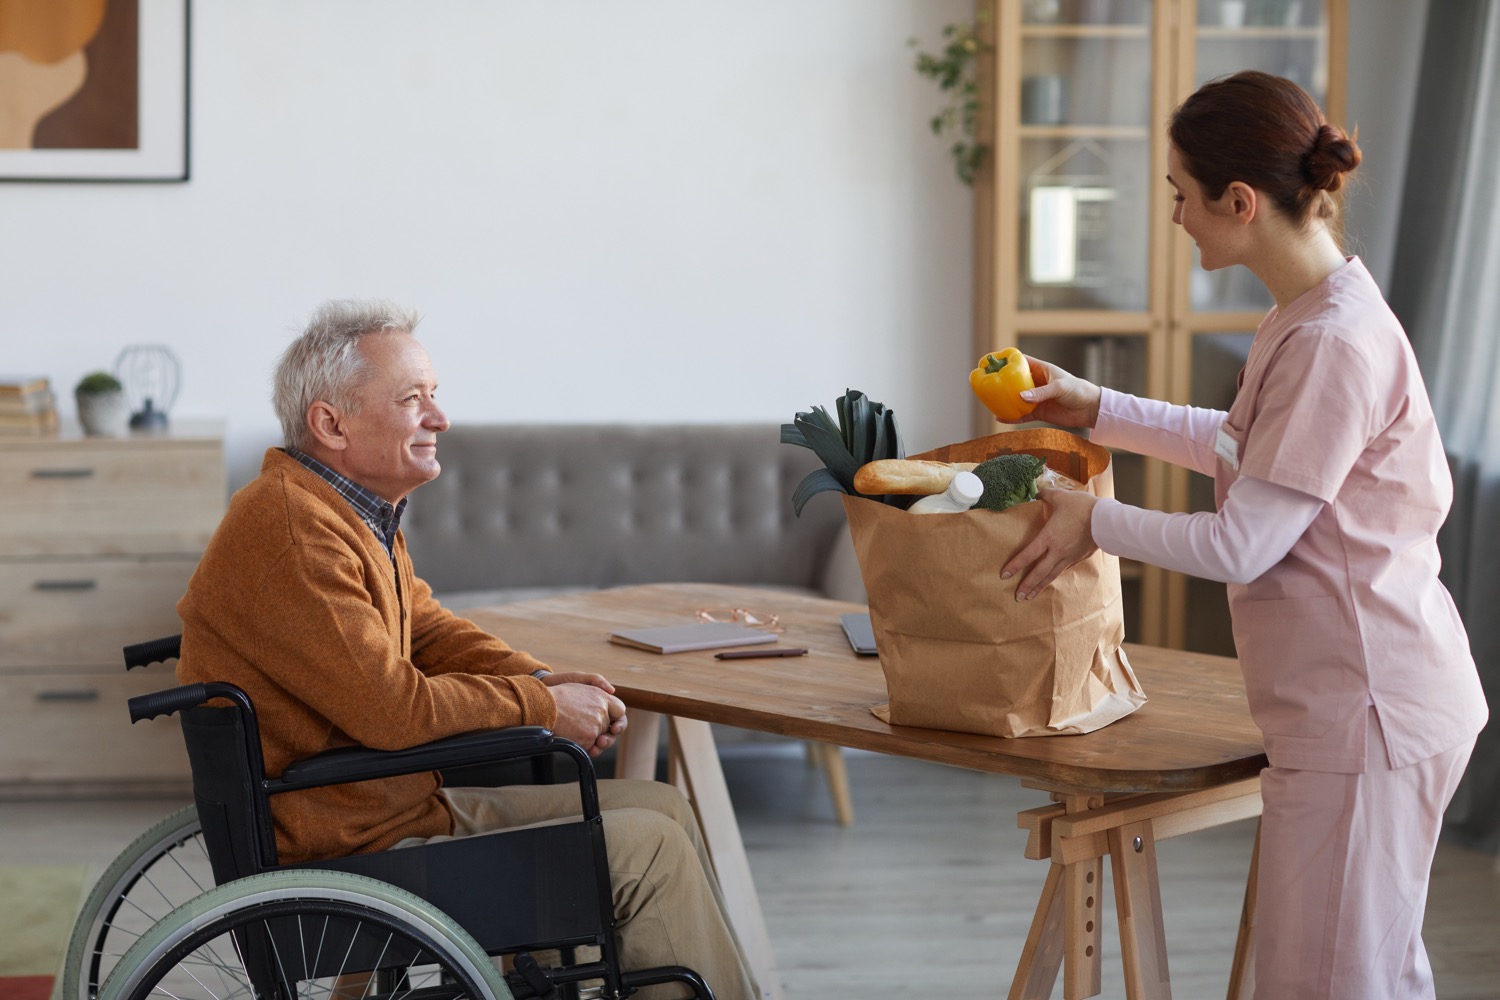 A caregiver brings an older man groceries to ensure food safety for older adults.